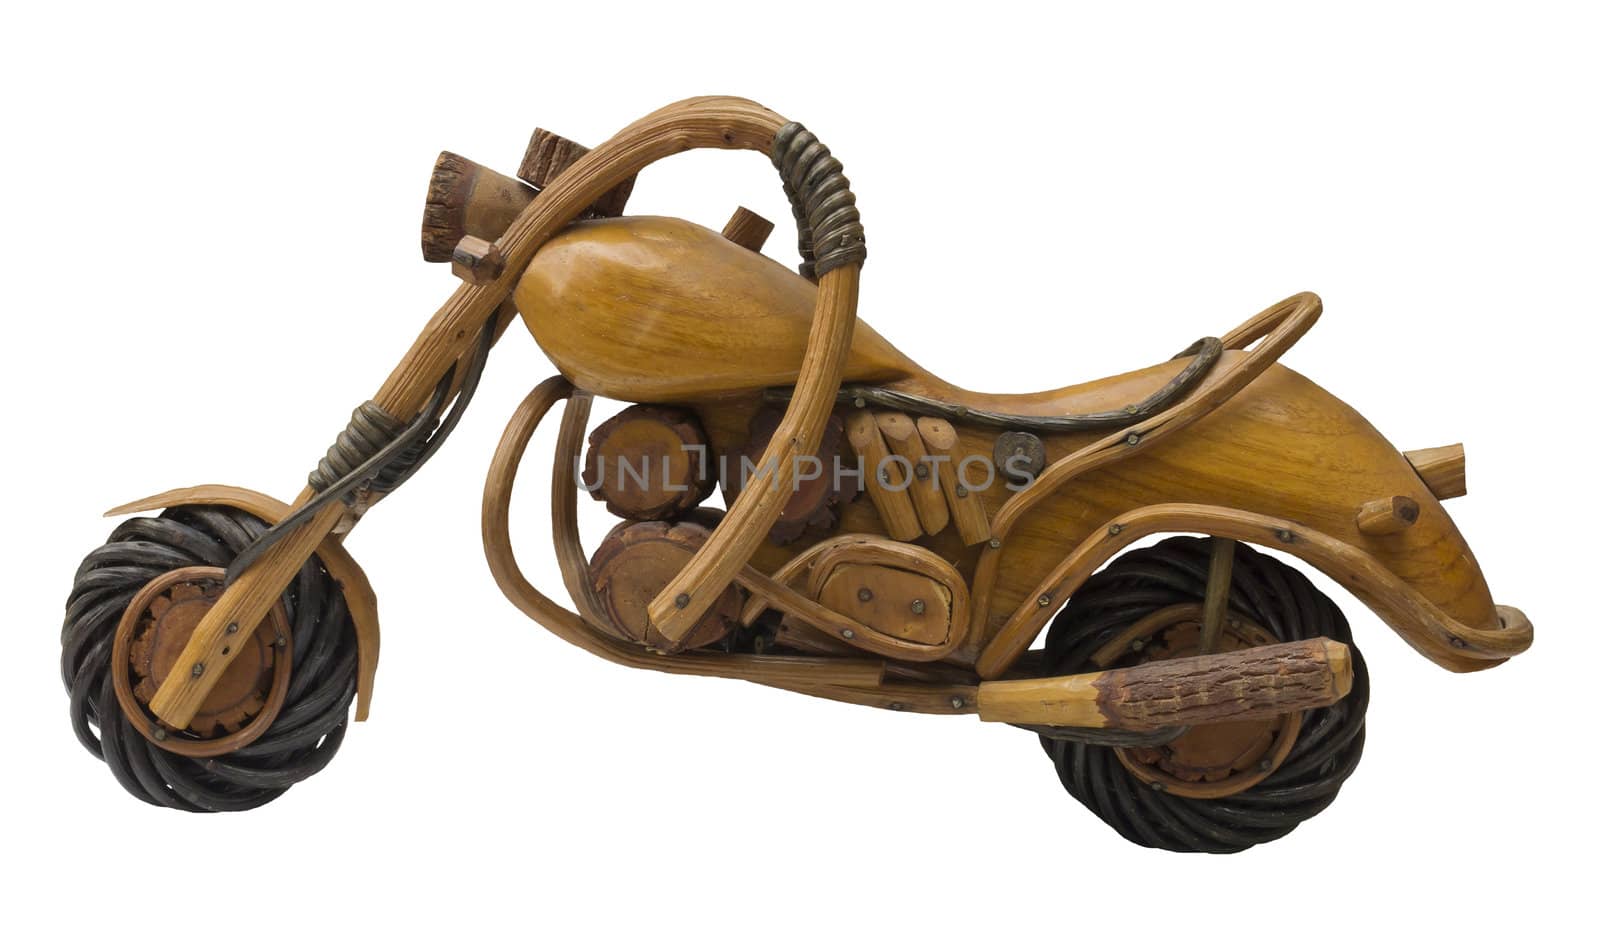 Wooden model of motorcycle, made of wood by skillfull homemade handyman.